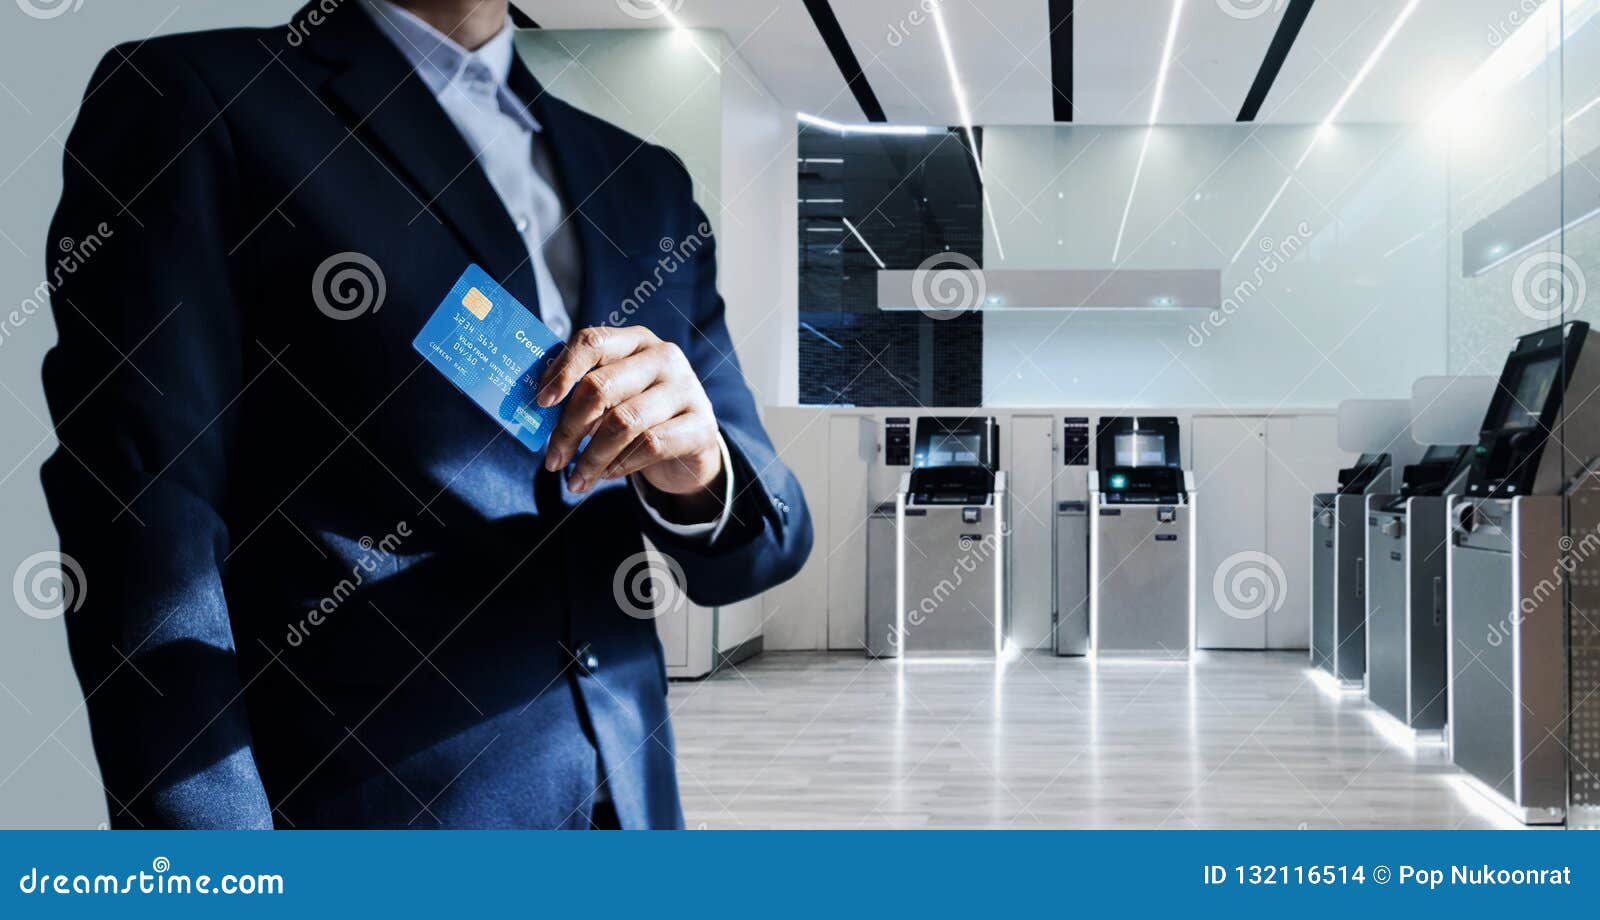 bank manager and credit card in hand standing confidently